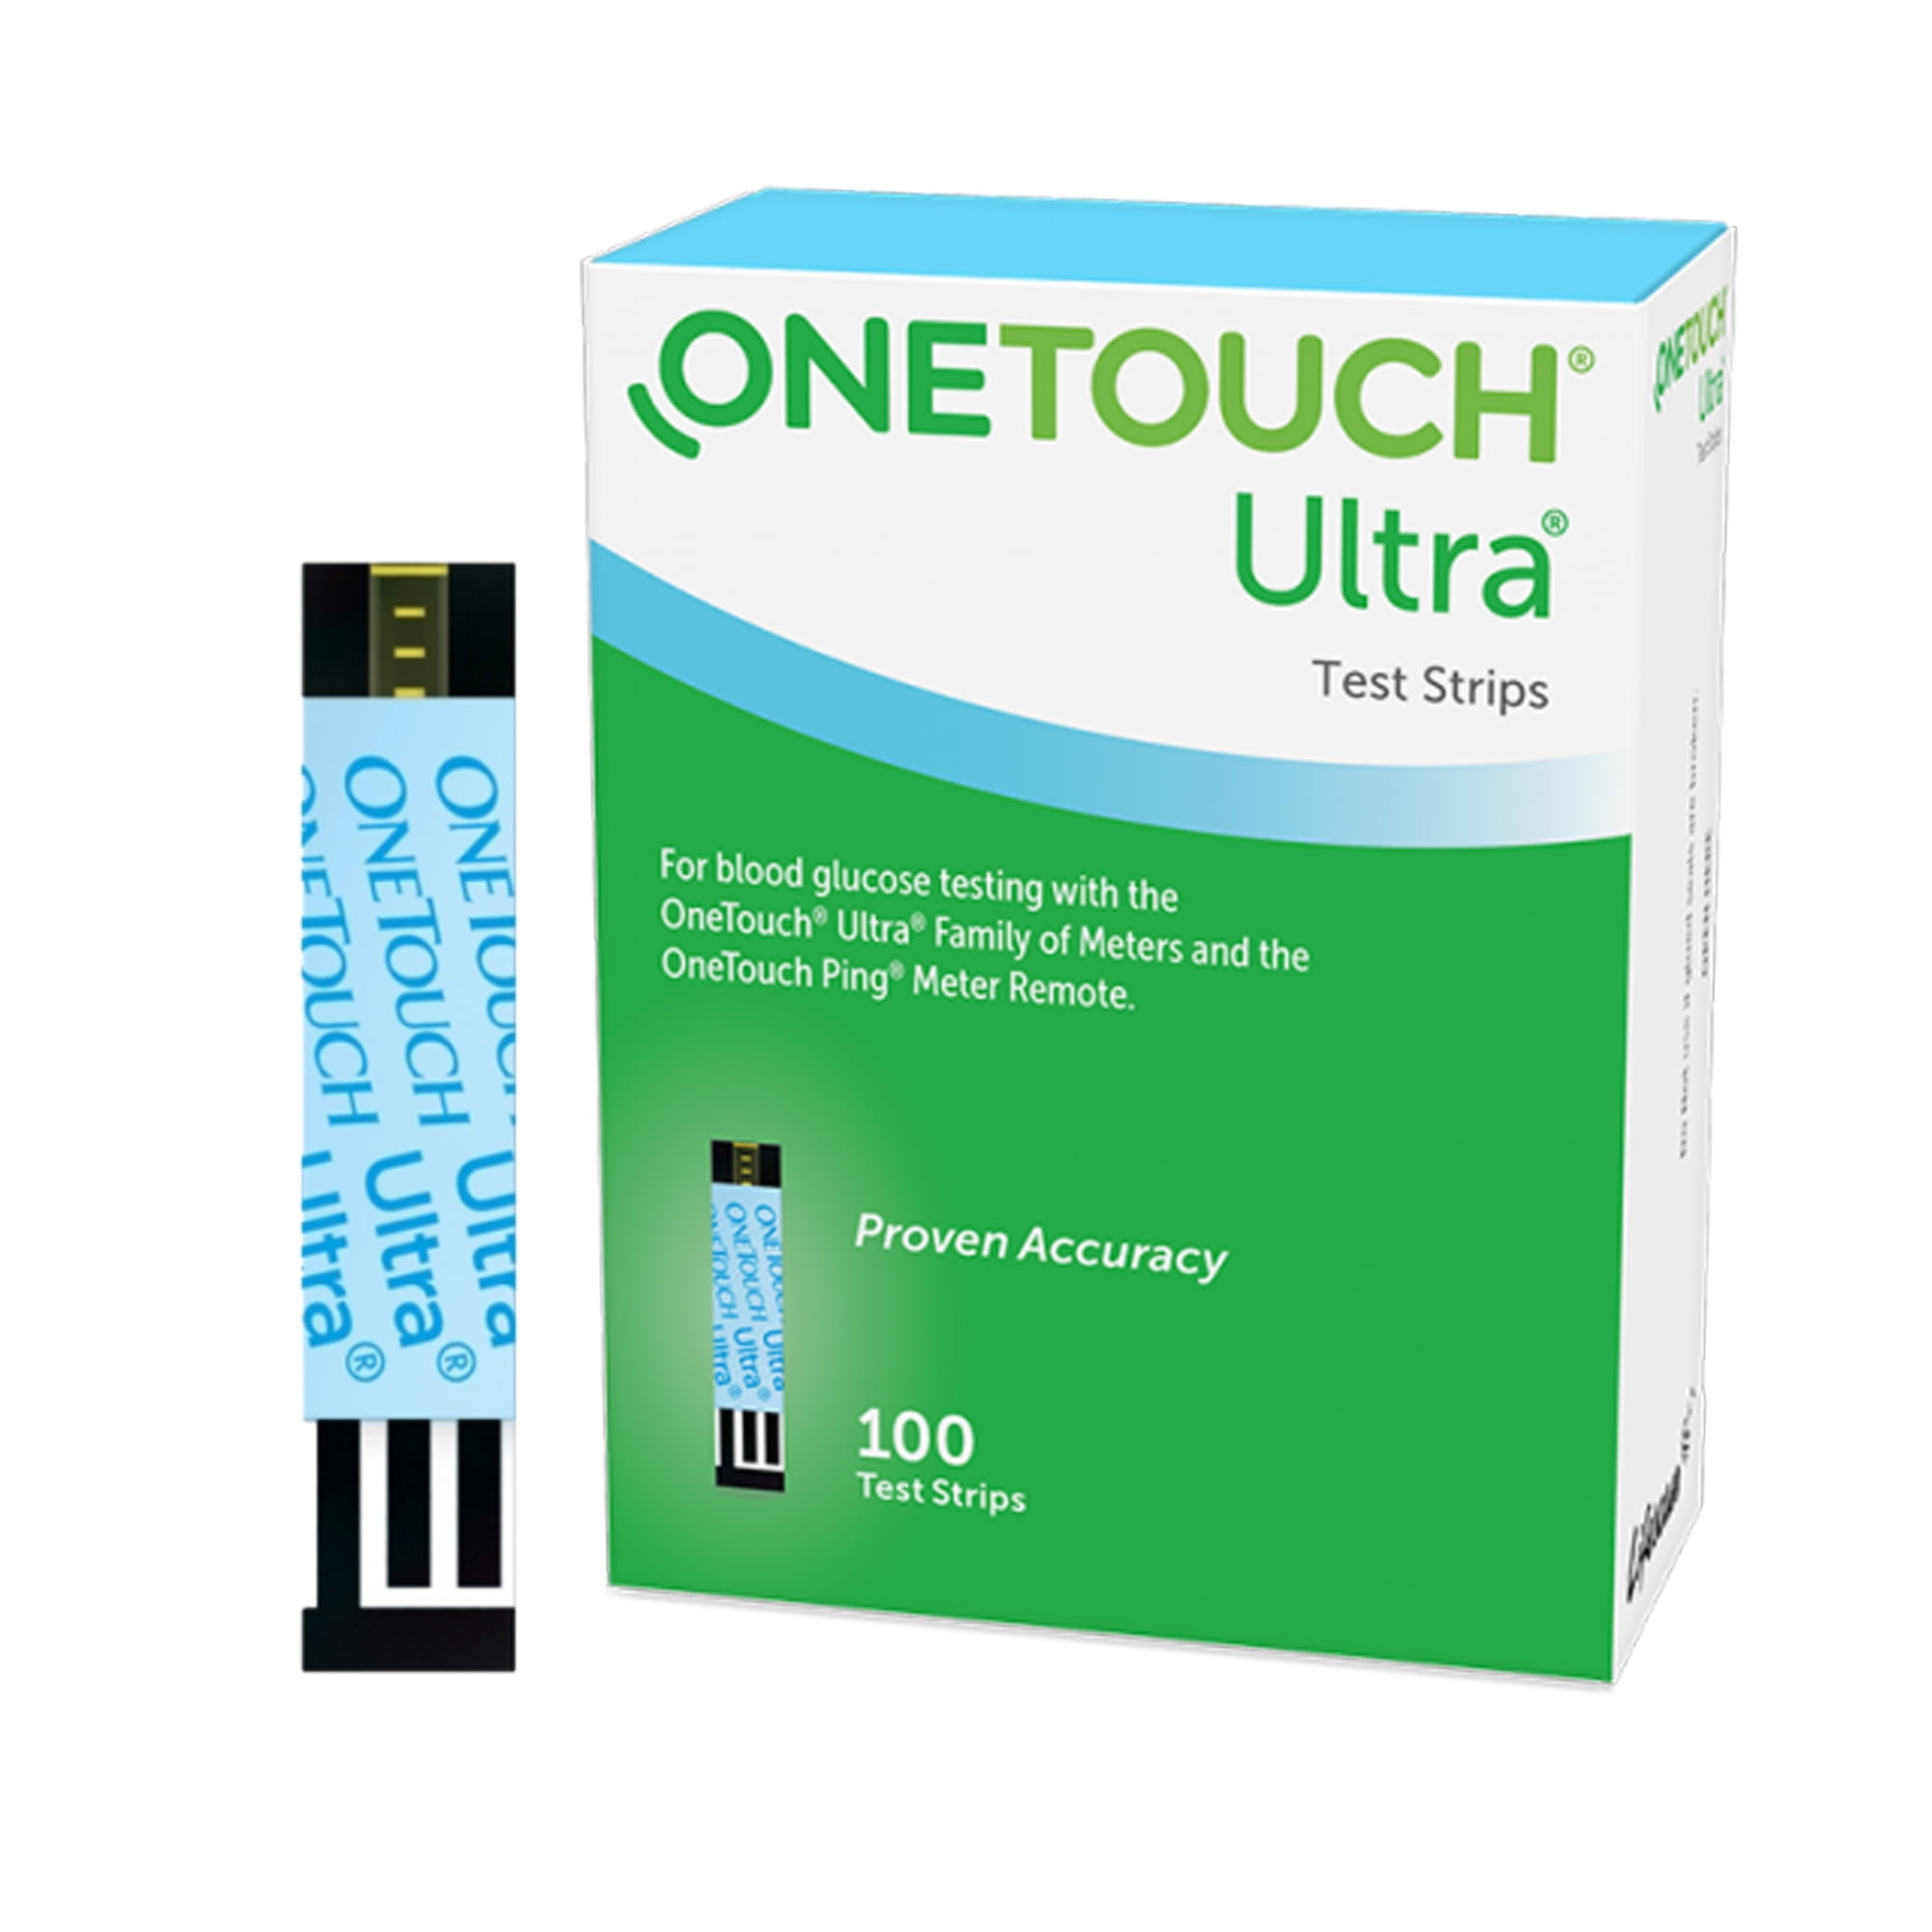 OneTouch Verio Test Strip-100 count